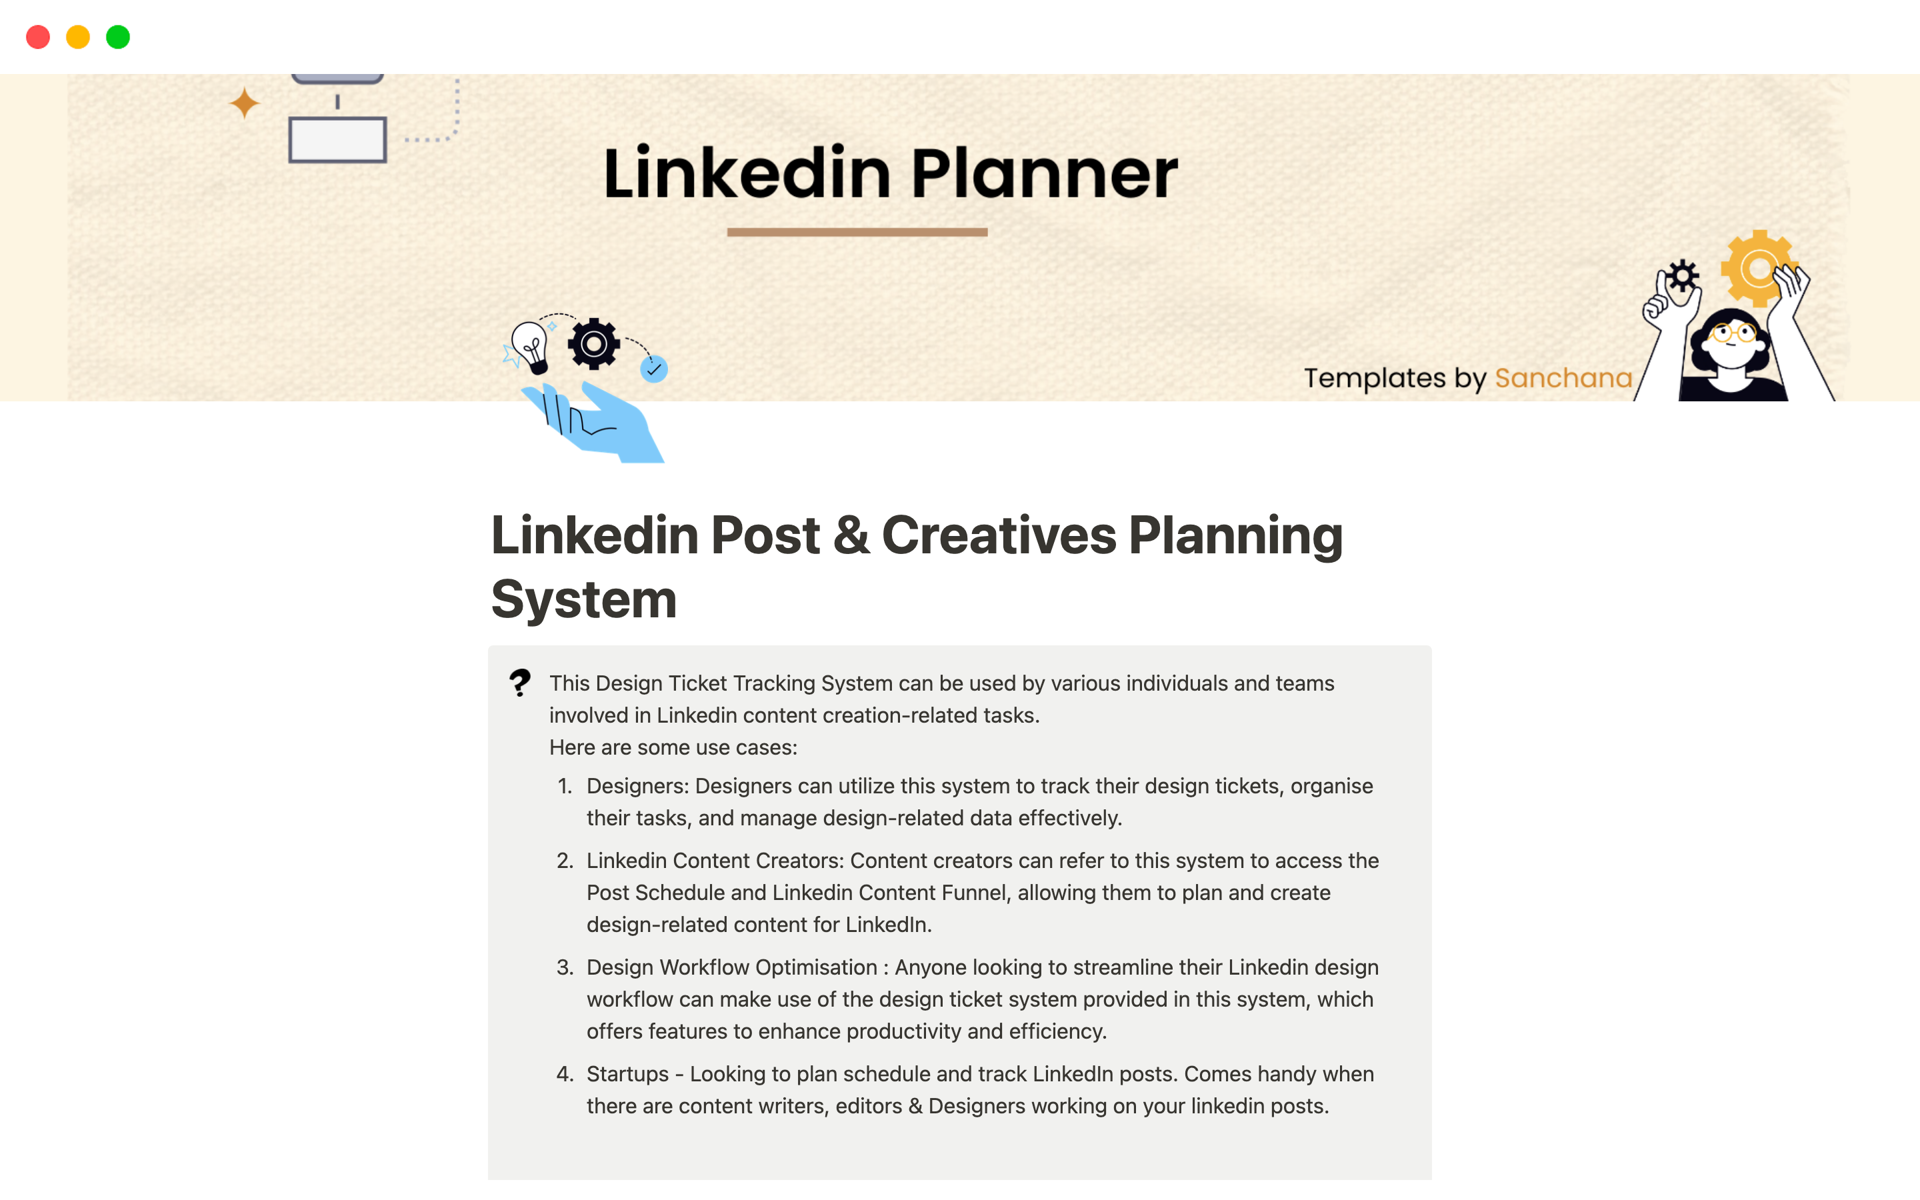 This Design Ticket Tracking System can be used by various individuals and teams involved in Linkedin content creation-related tasks. 